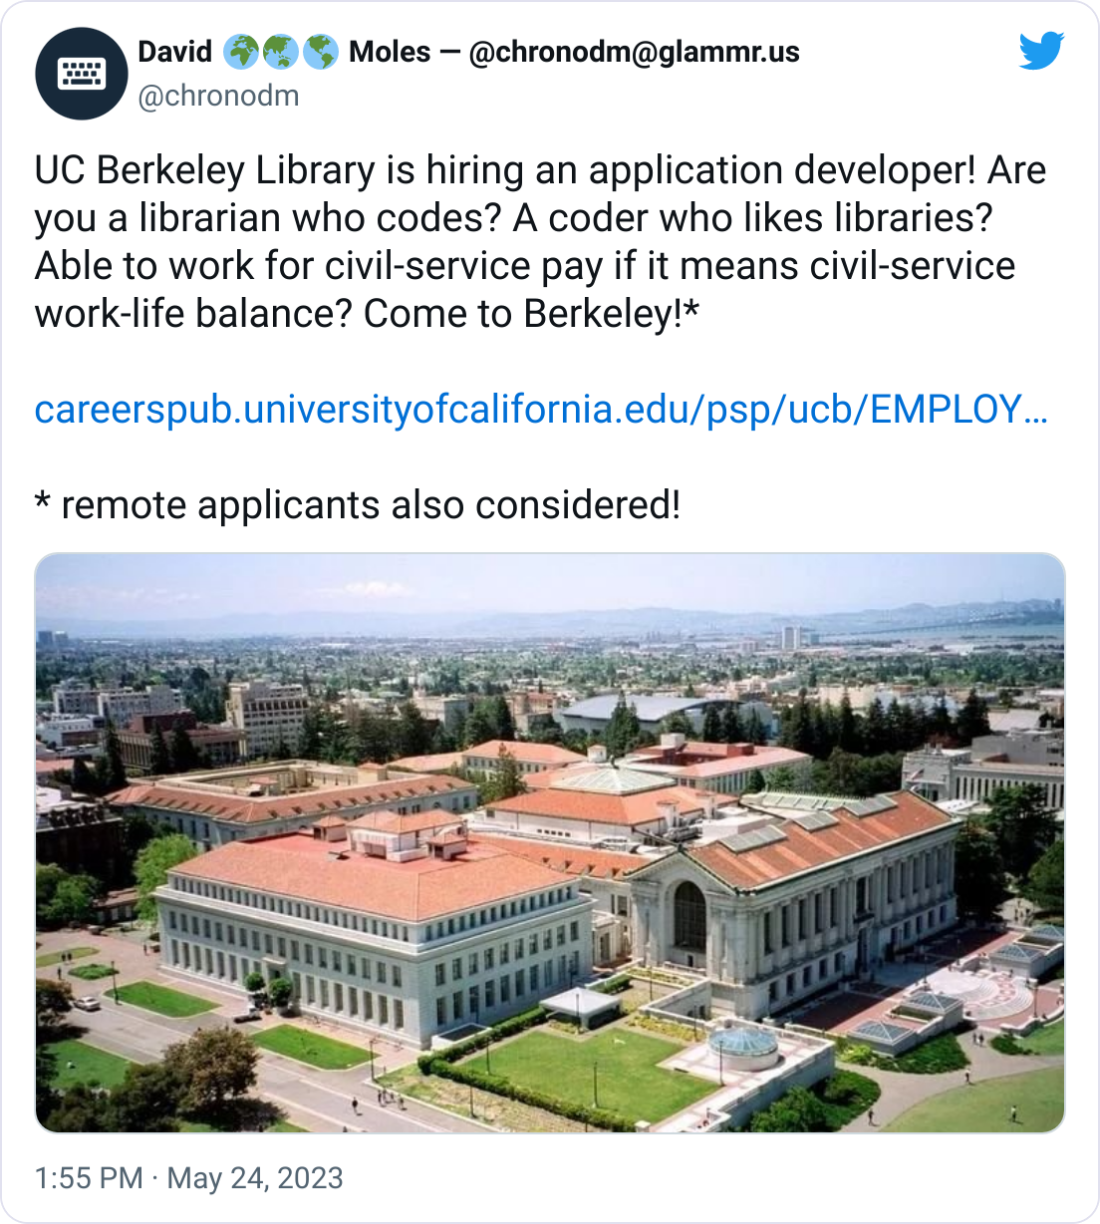  David 🌍🌏🌎 Moles — @chronodm@glammr.us @chronodm UC Berkeley Library is hiring an application developer! Are you a librarian who codes? A coder who likes libraries? Able to work for civil-service pay if it means civil-service work-life balance? Come to Berkeley!*  https://careerspub.universityofcalifornia.edu/psp/ucb/EMPLOYEE/HRMS/c/HRS_HRAM.HRS_APP_SCHJOB.GBL?Page=HRS_APP_JBPST&JobOpeningId=53601&PostingSeq=1&SiteId=21&languageCd=ENG&FOCUS=Applicant  * remote applicants also considered!